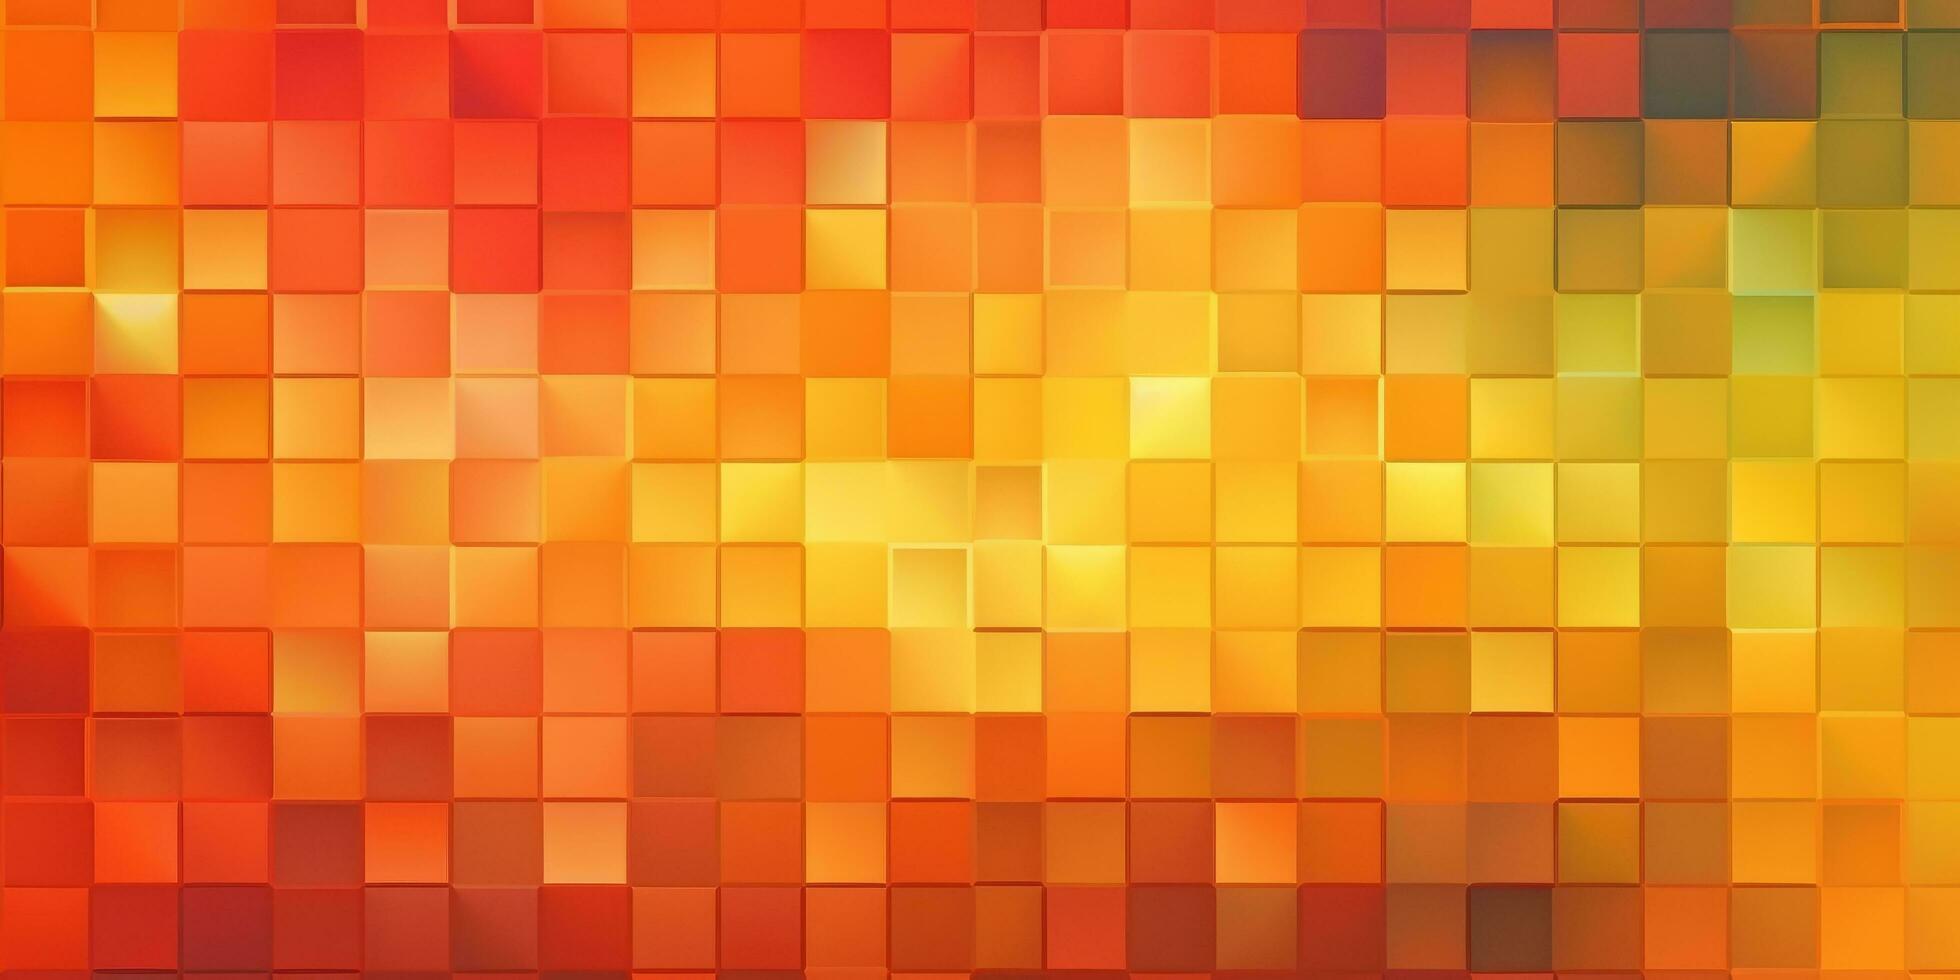 Art Orange Color Block Abstract Pattern Illustration Background Stock  Photo, Picture and Royalty Free Image. Image 113083682.